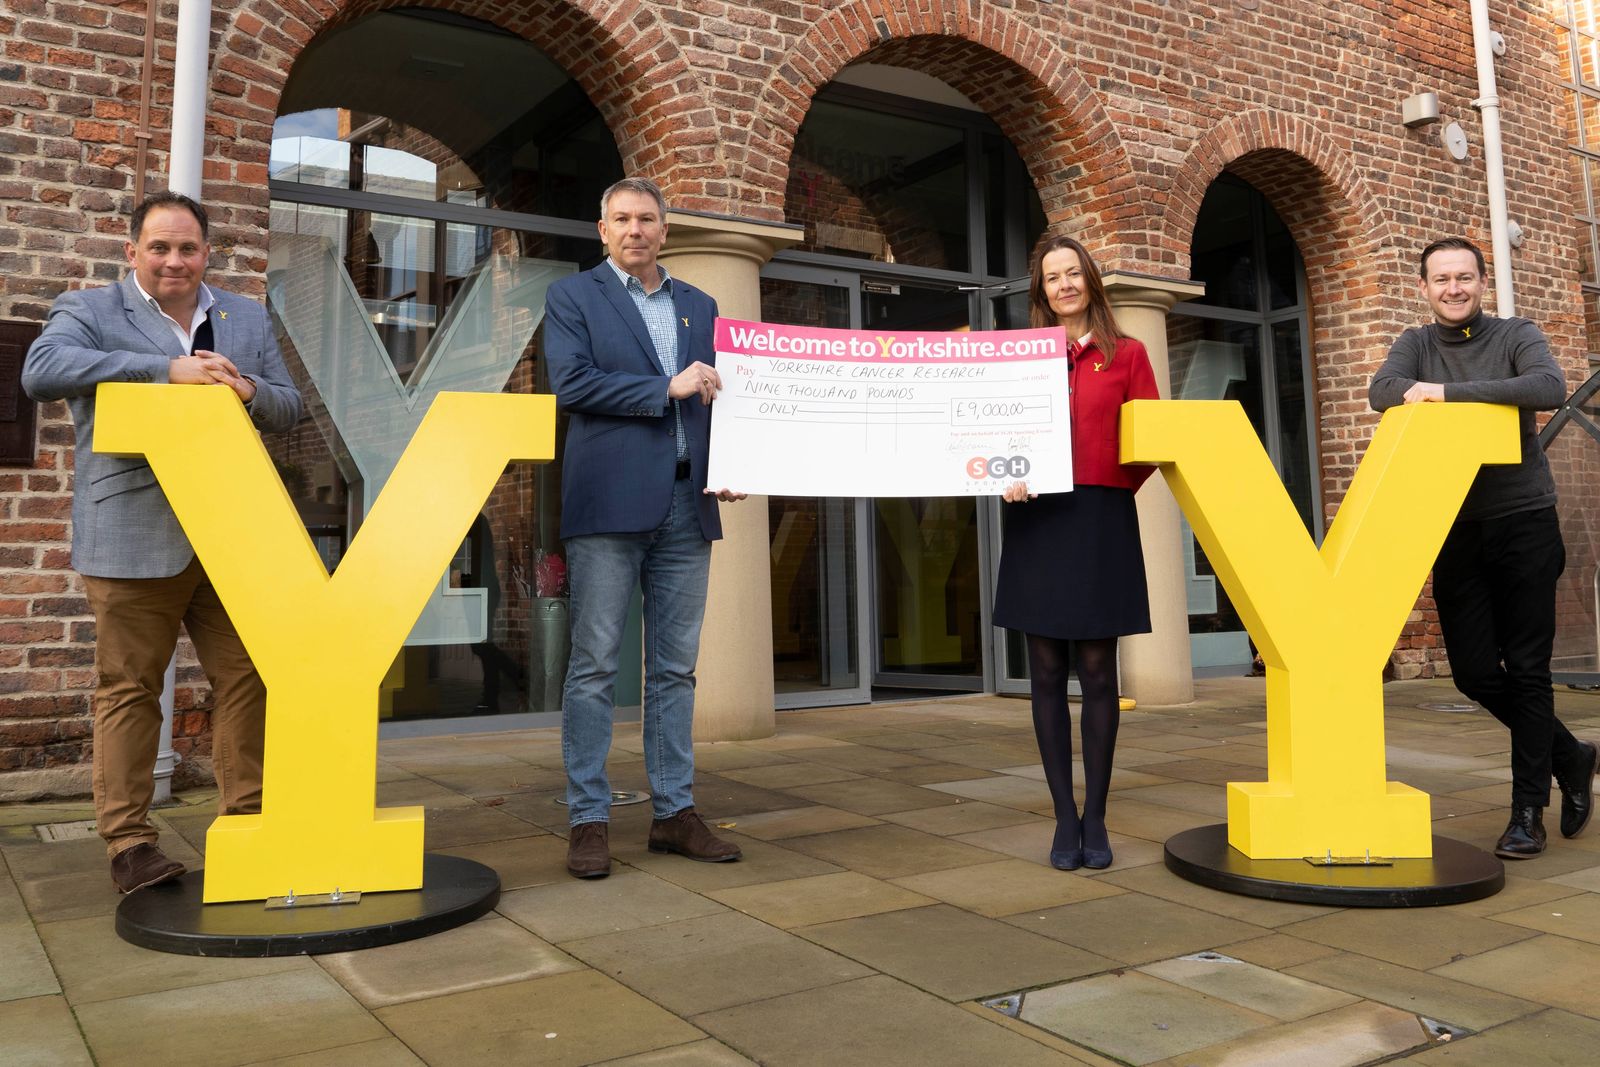 Yorkshire Cancer Research named official charity partner of
Welcome to Yorkshire